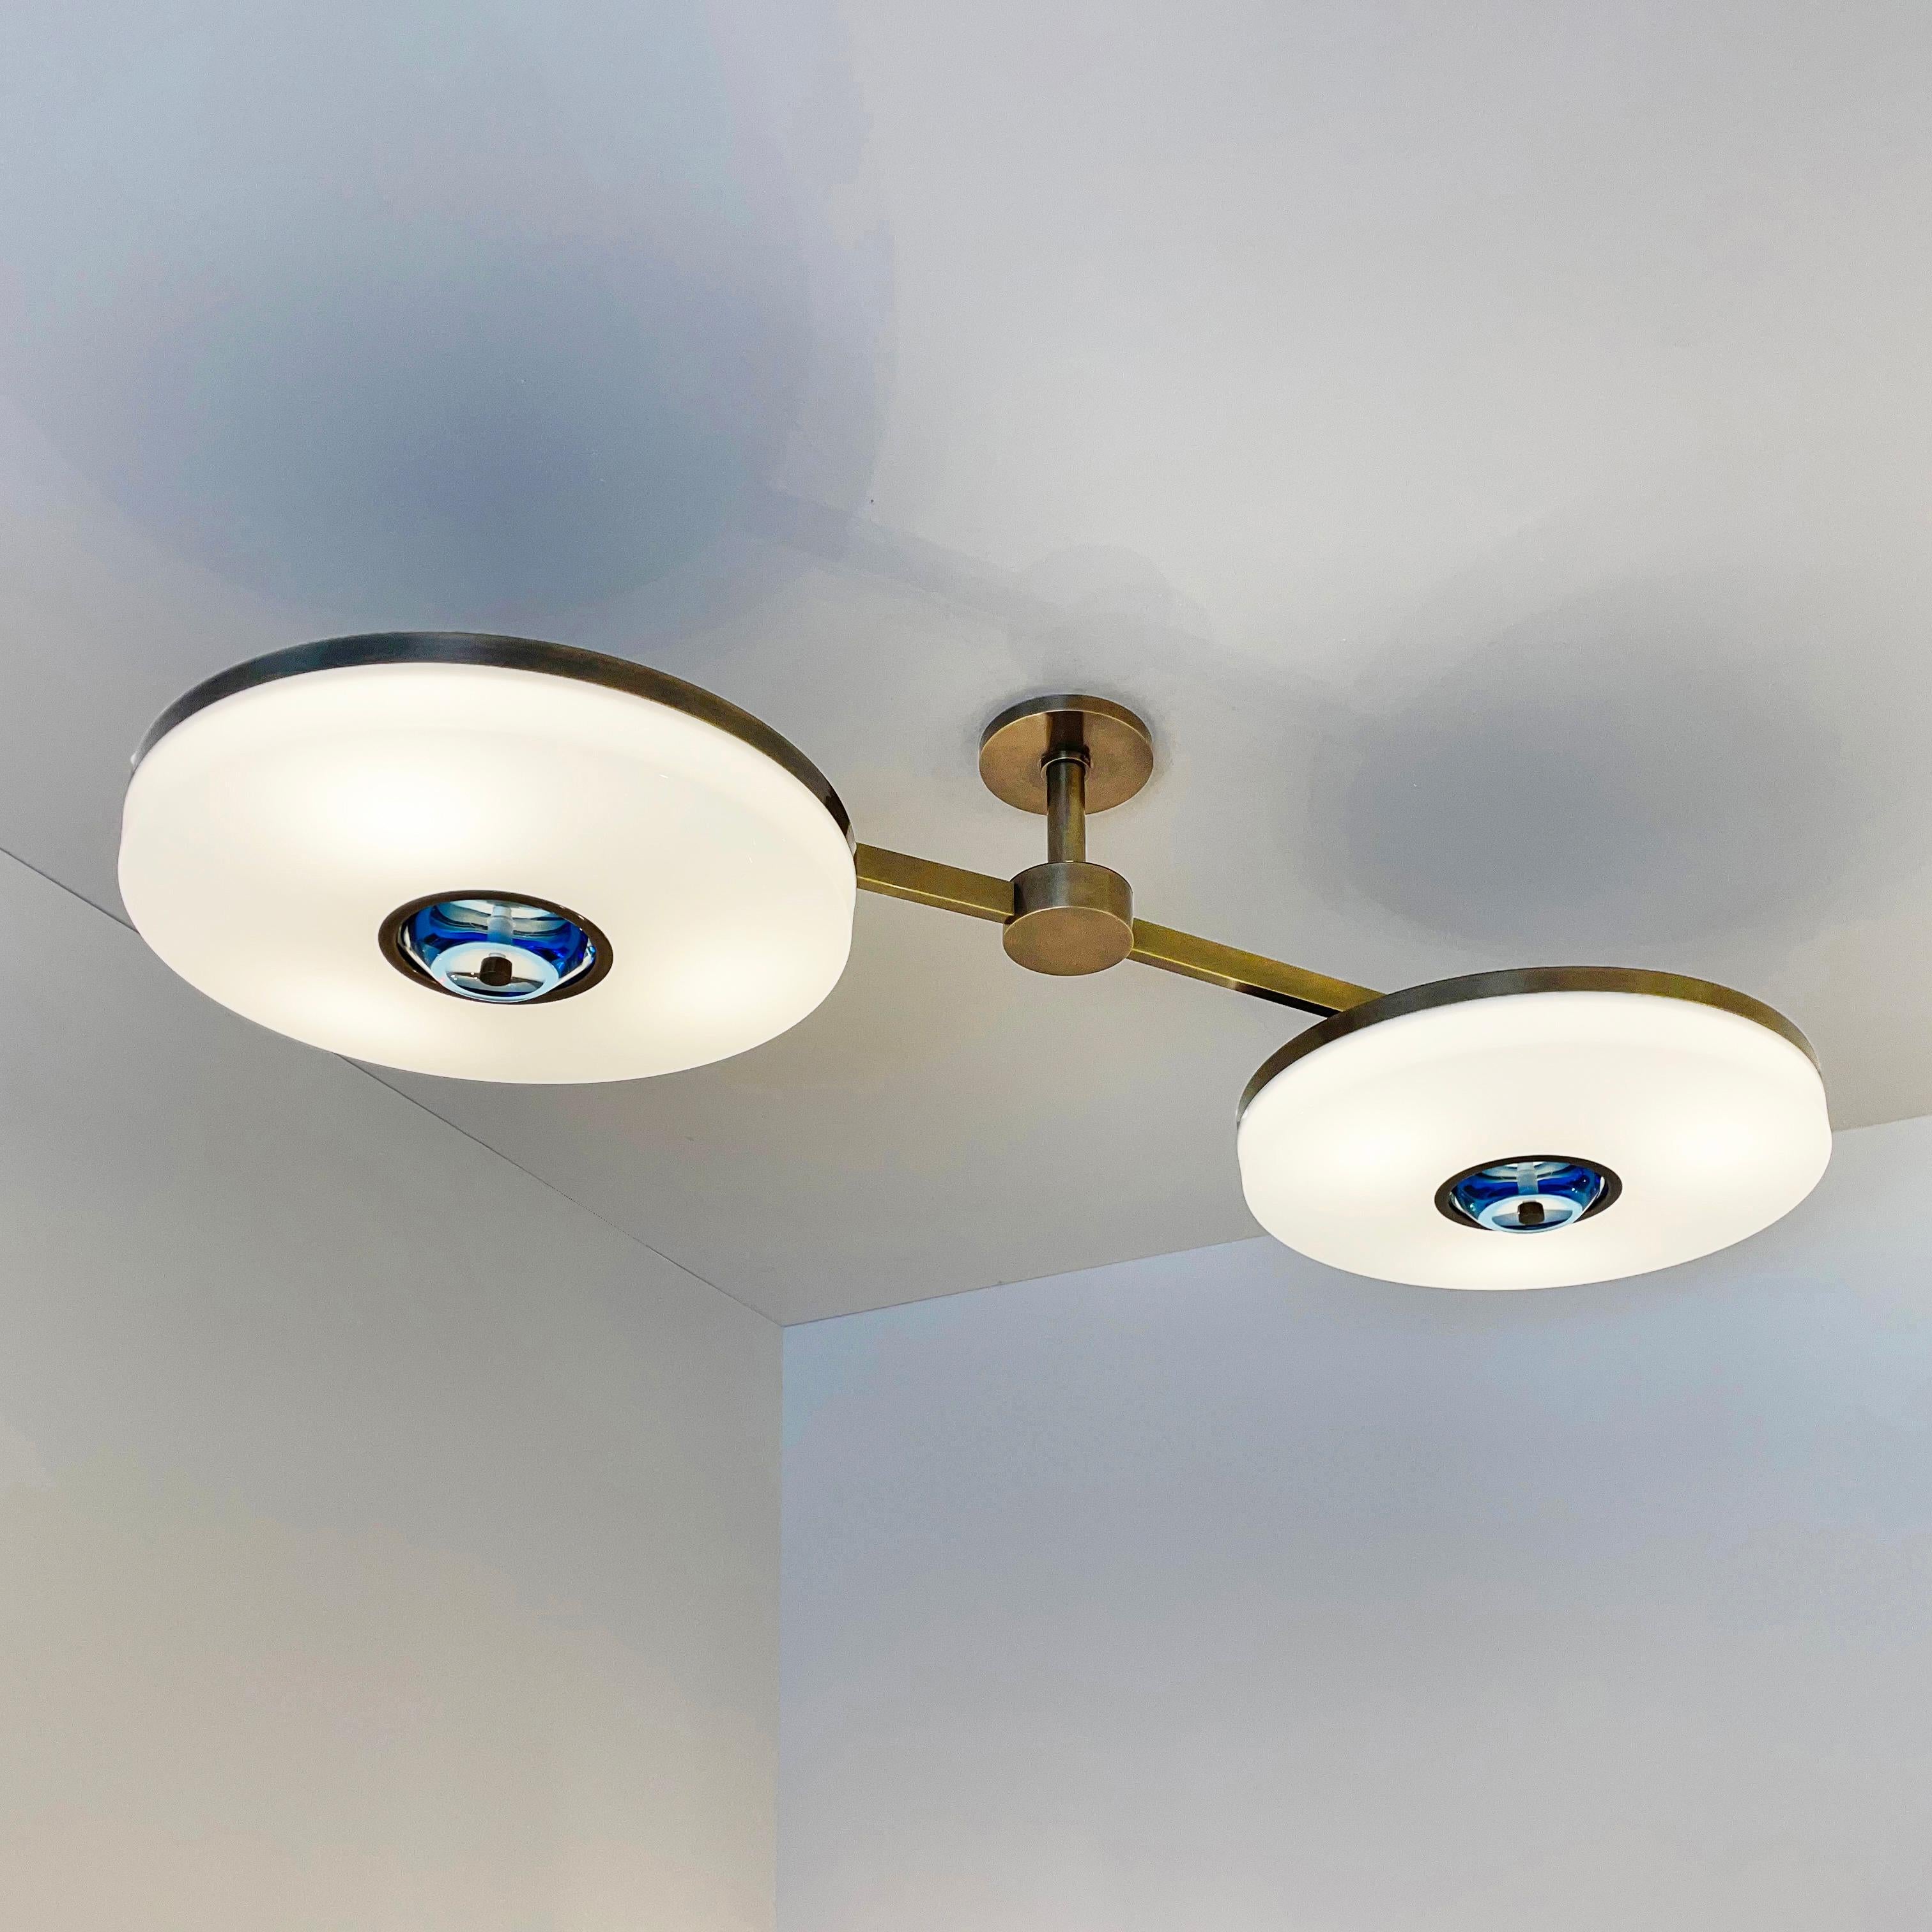 Modern Iris N. 2 Ceiling Light by Gaspare Asaro For Sale